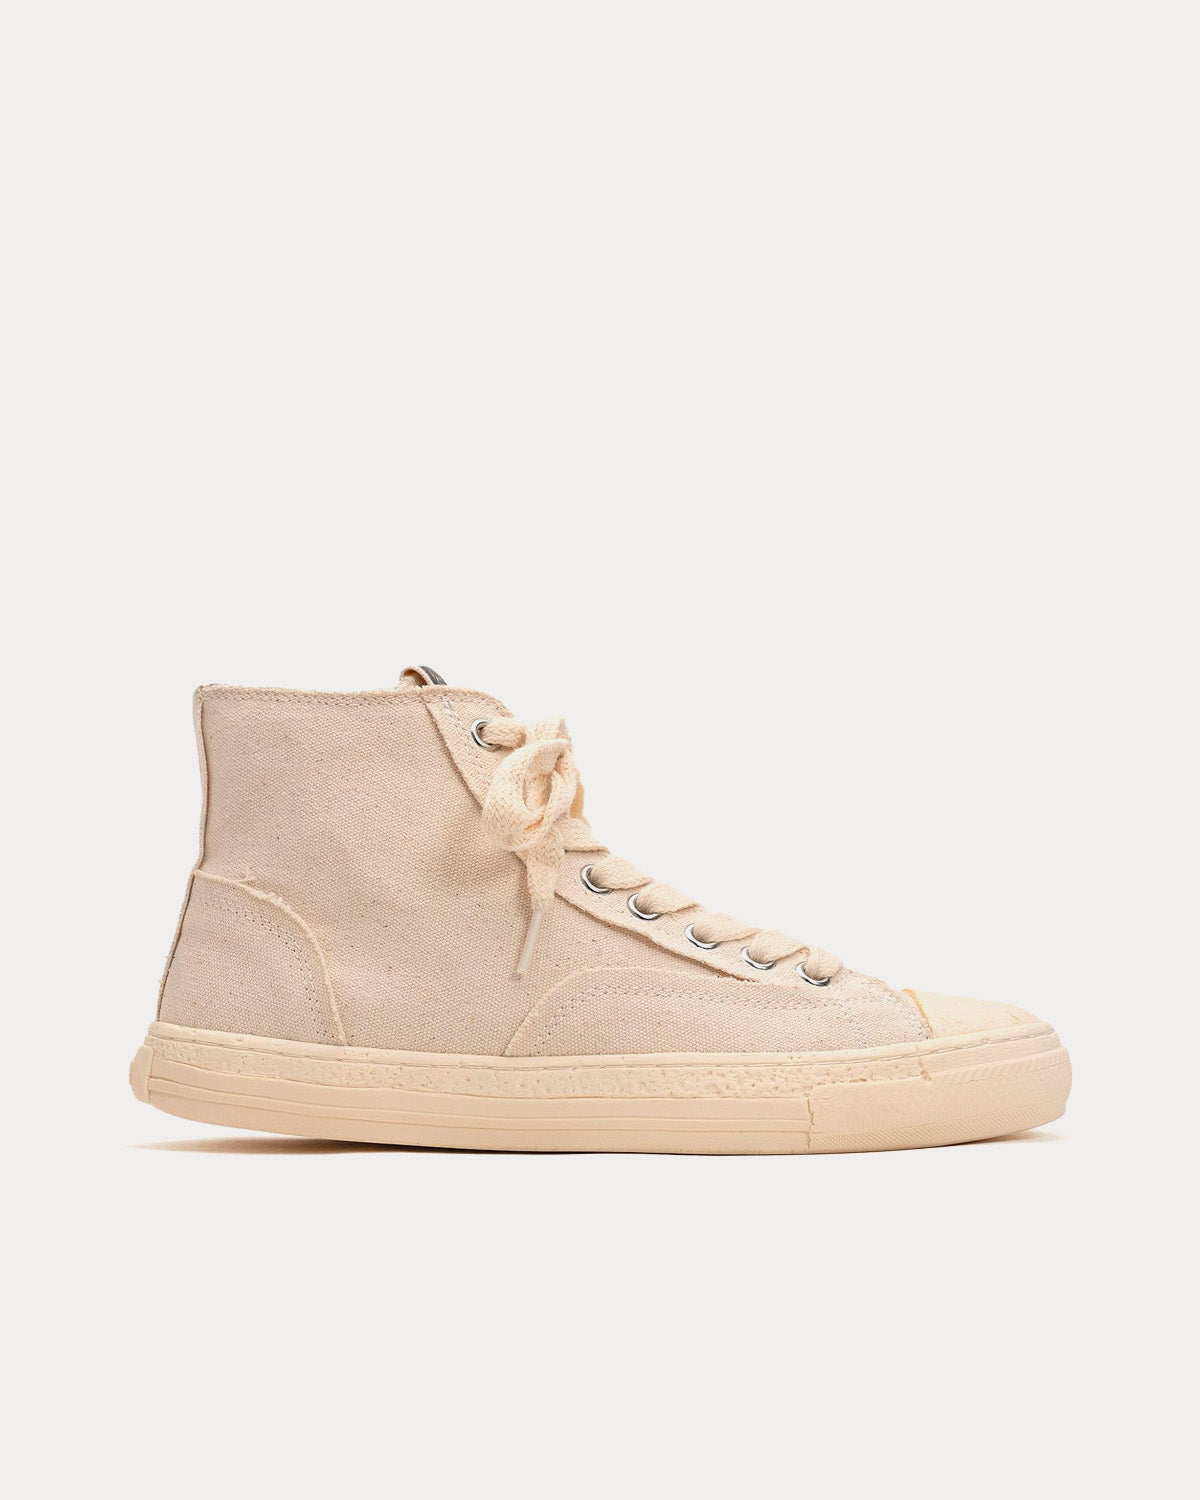 General Scale By Maison Mihara Yasuhiro - Past Sole Canvas White High Top Sneakers